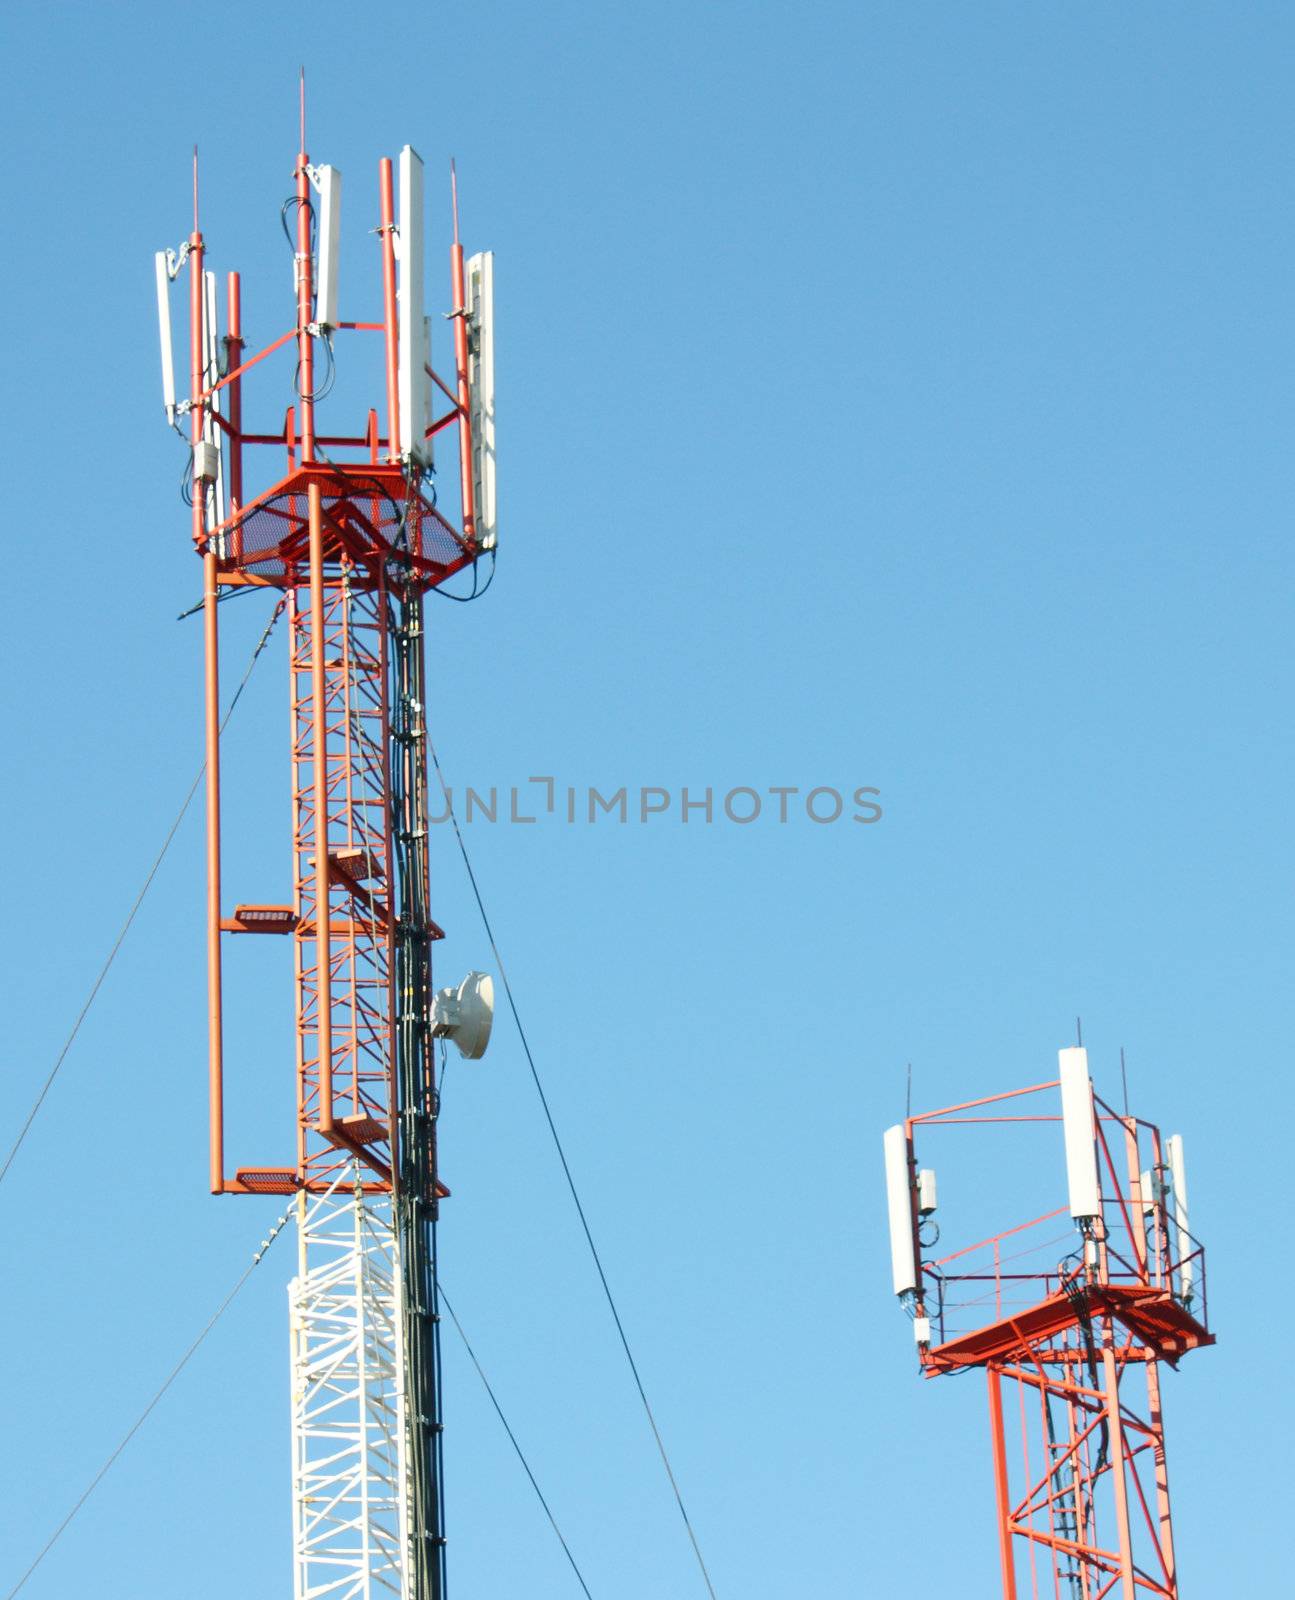 Aerial mobile communication by aarrows